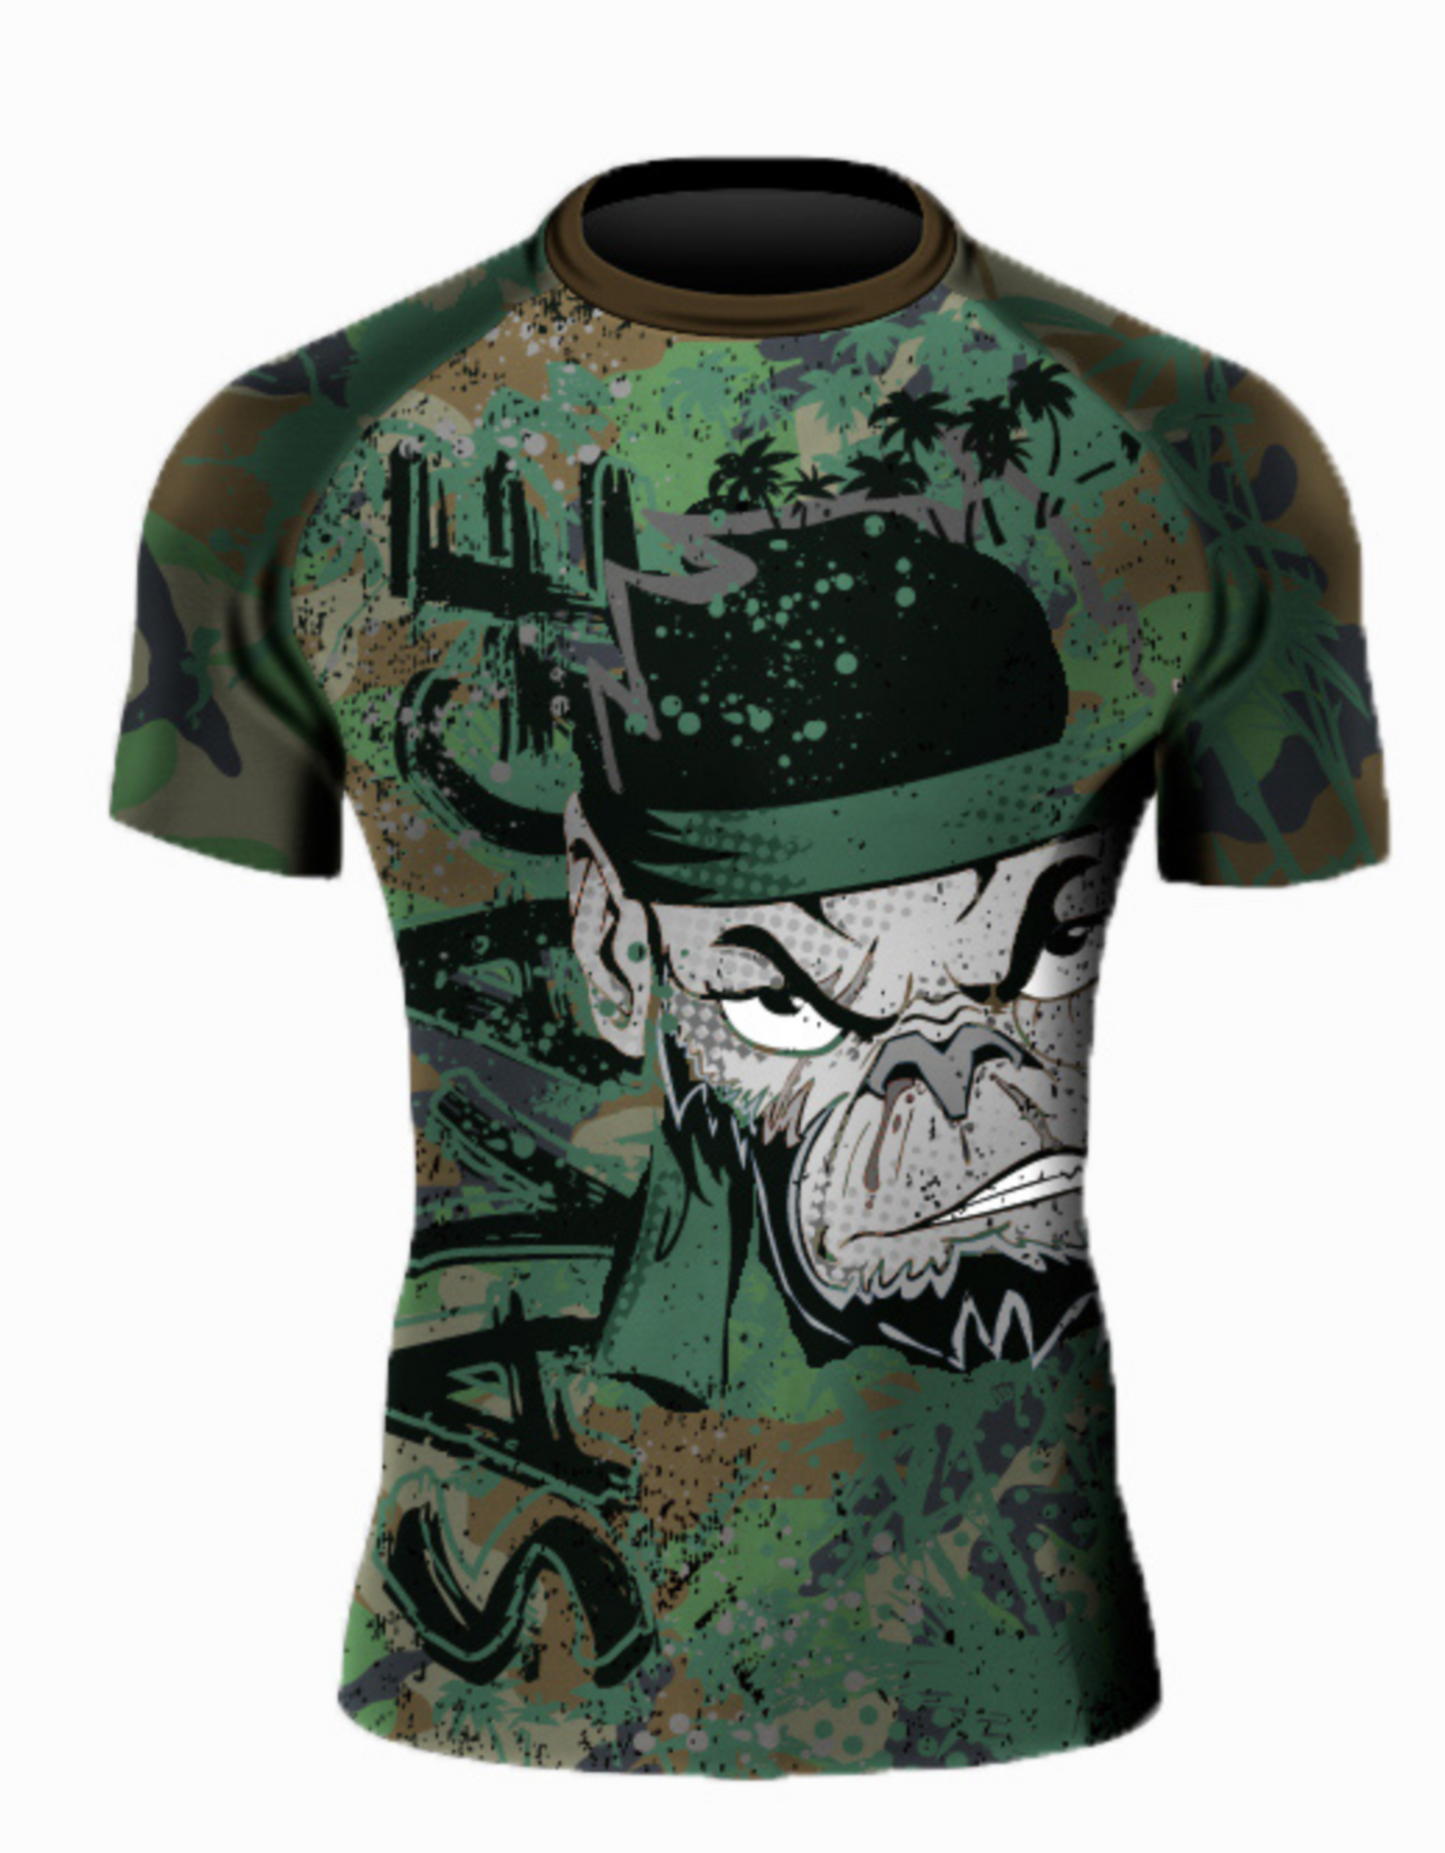 Camo Monkey Short Rash Guard And Shorts Package Presale items Shipping To Start December 5th Savage Fightwear